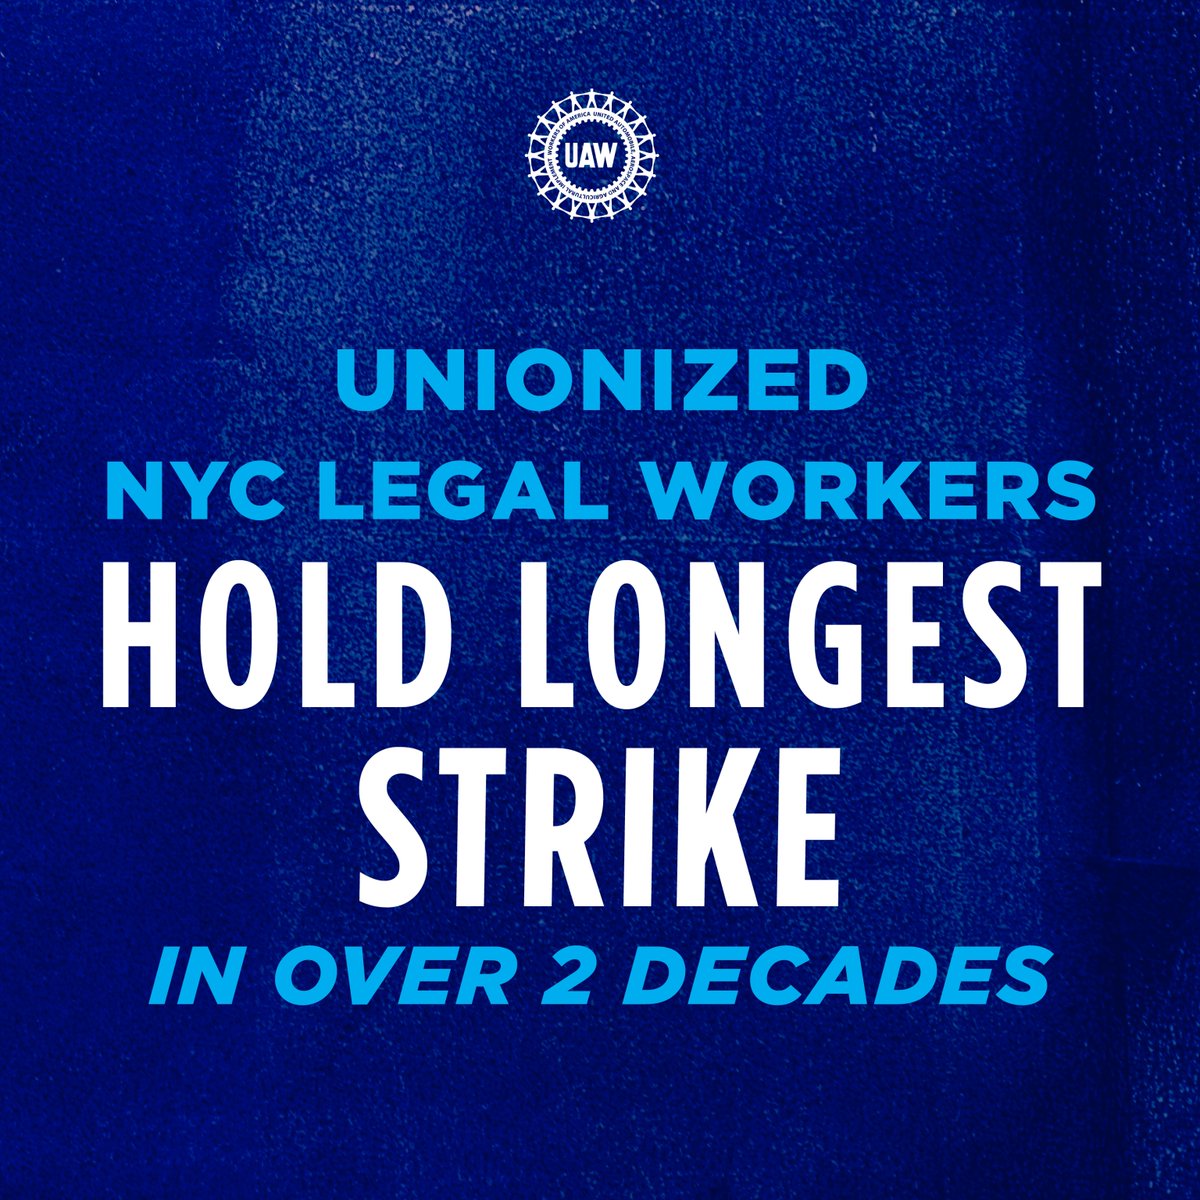 Seeking to strengthen high-quality free legal services for New Yorkers and fight high turnover, union members of Mobilization for Justice (MFJ), hit a historic landmark this week as their strike enters its seventh week. ow.ly/Q1B750RaYbs #StandUpUAW @MFJUnion | @UAWRegion9A